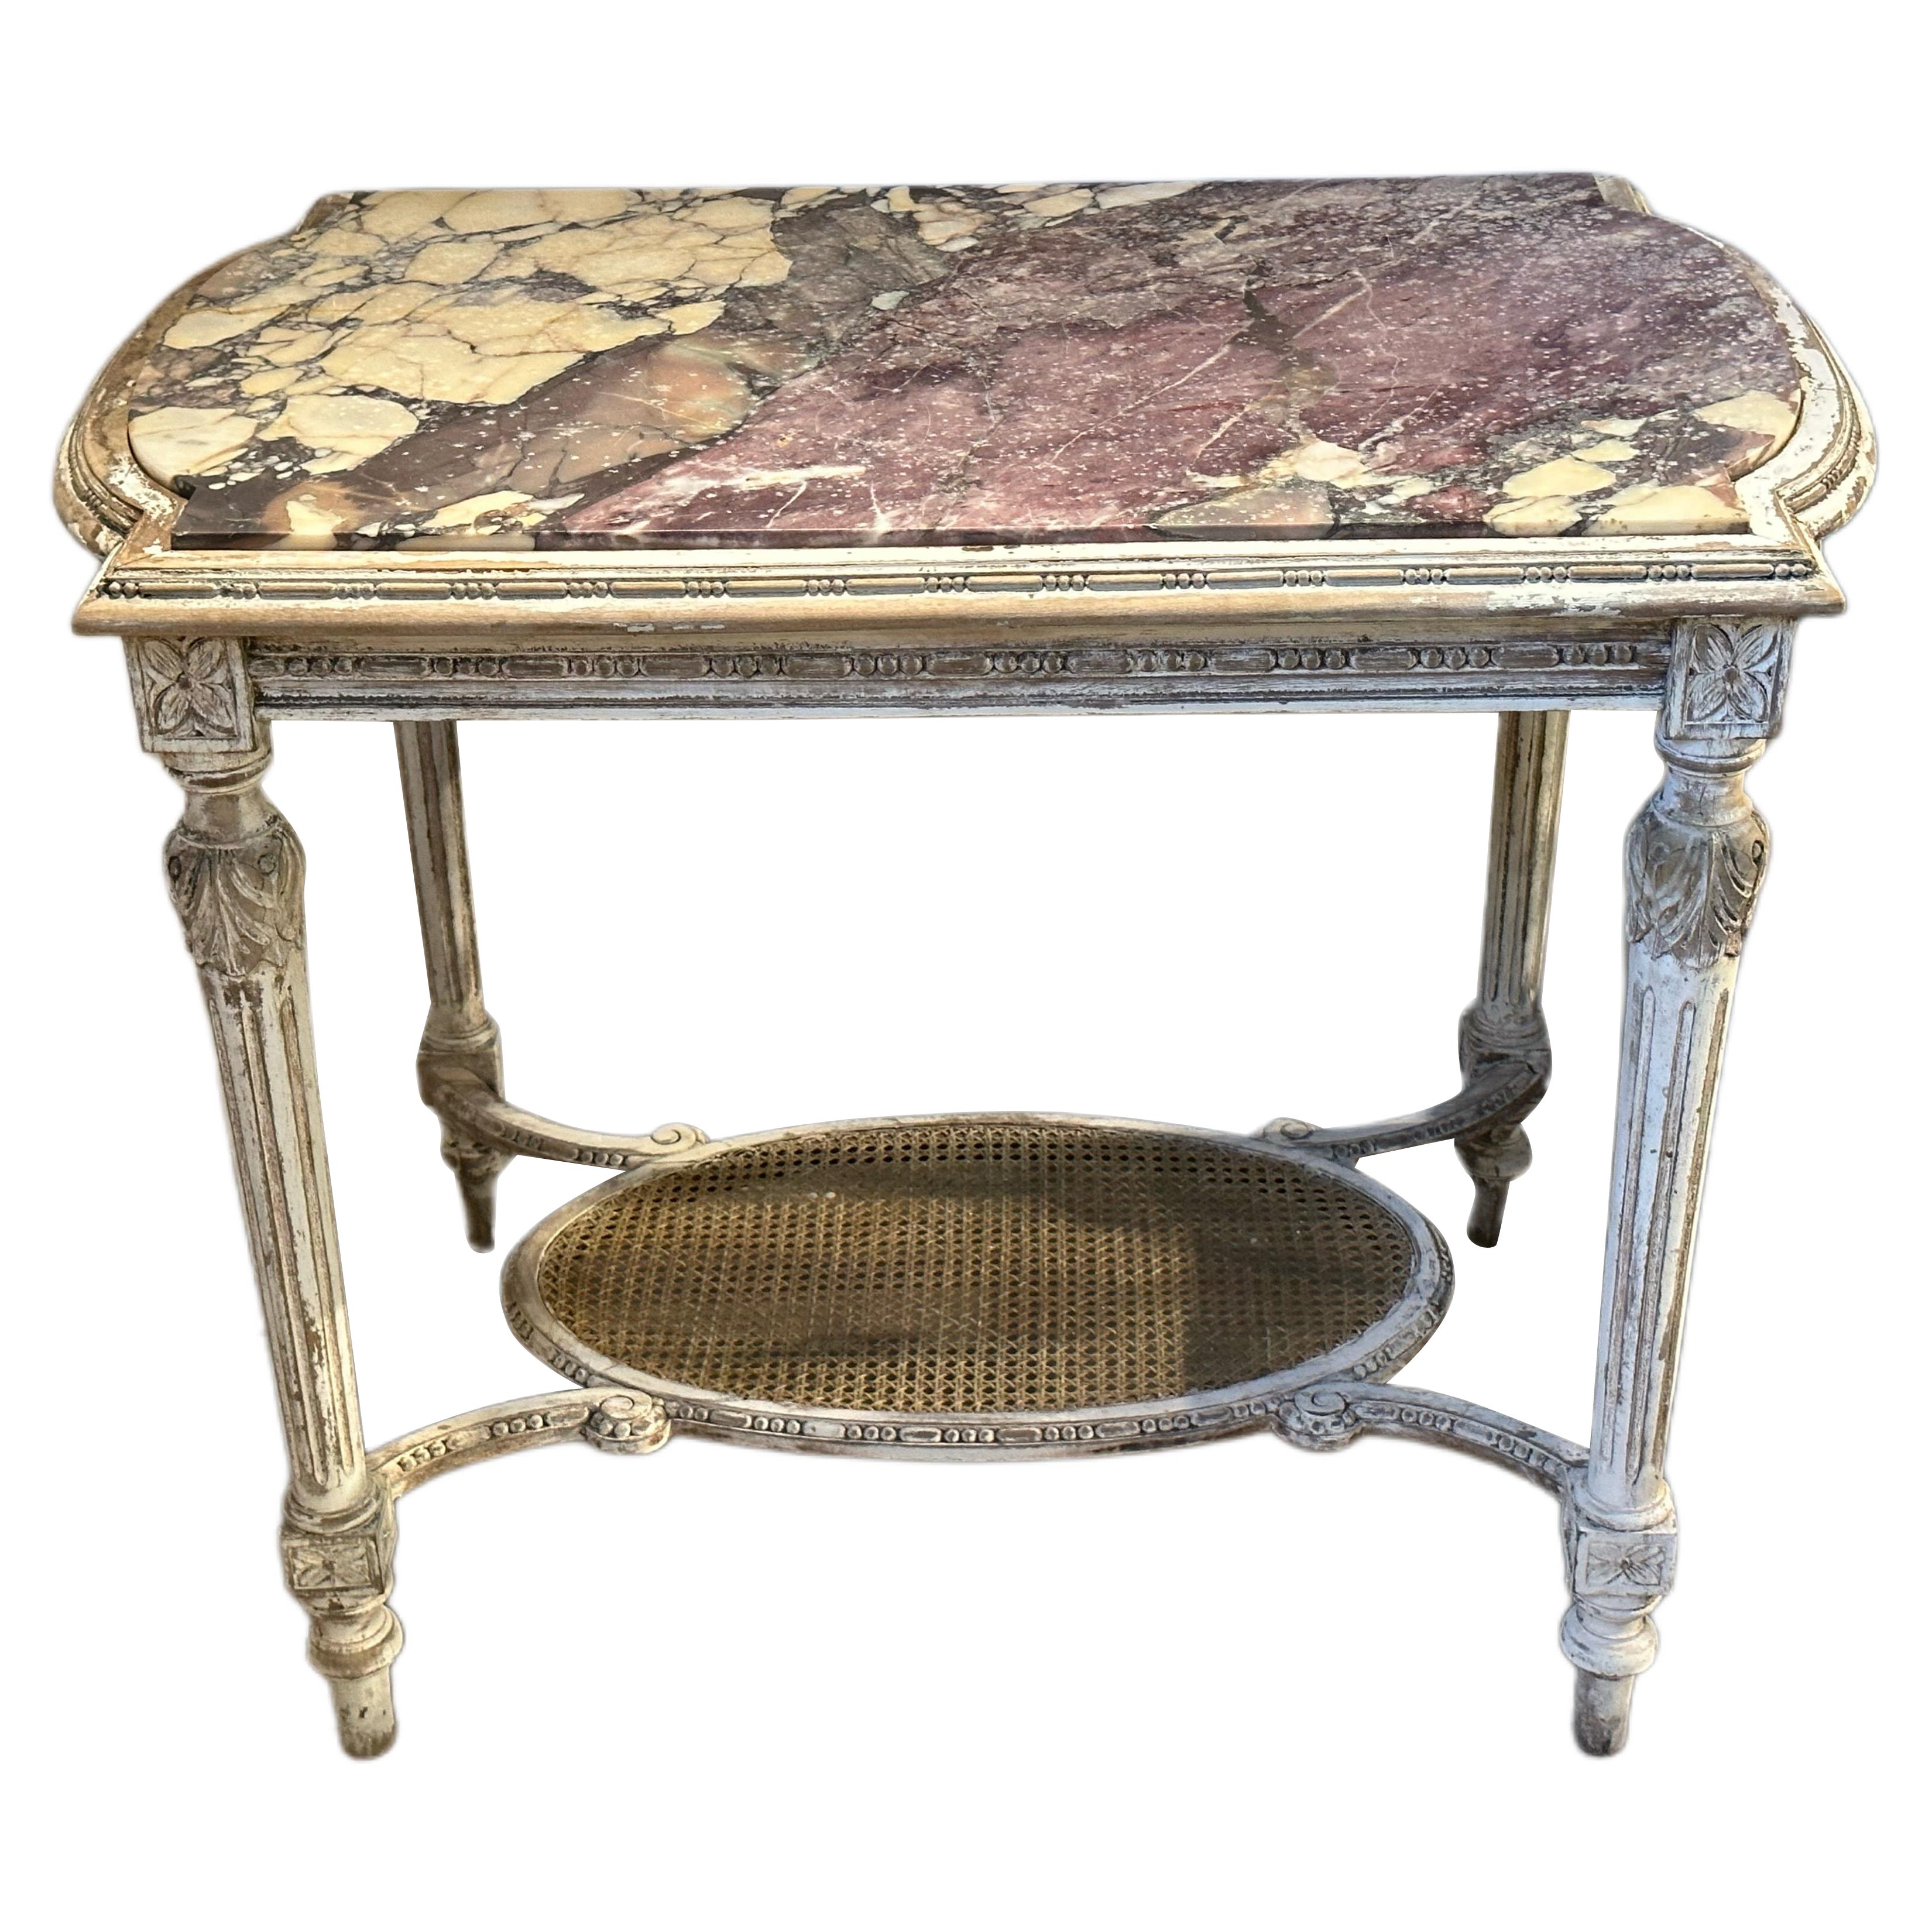 Late 19th/early 20th Century French Louis XVI Center Table or Console For Sale